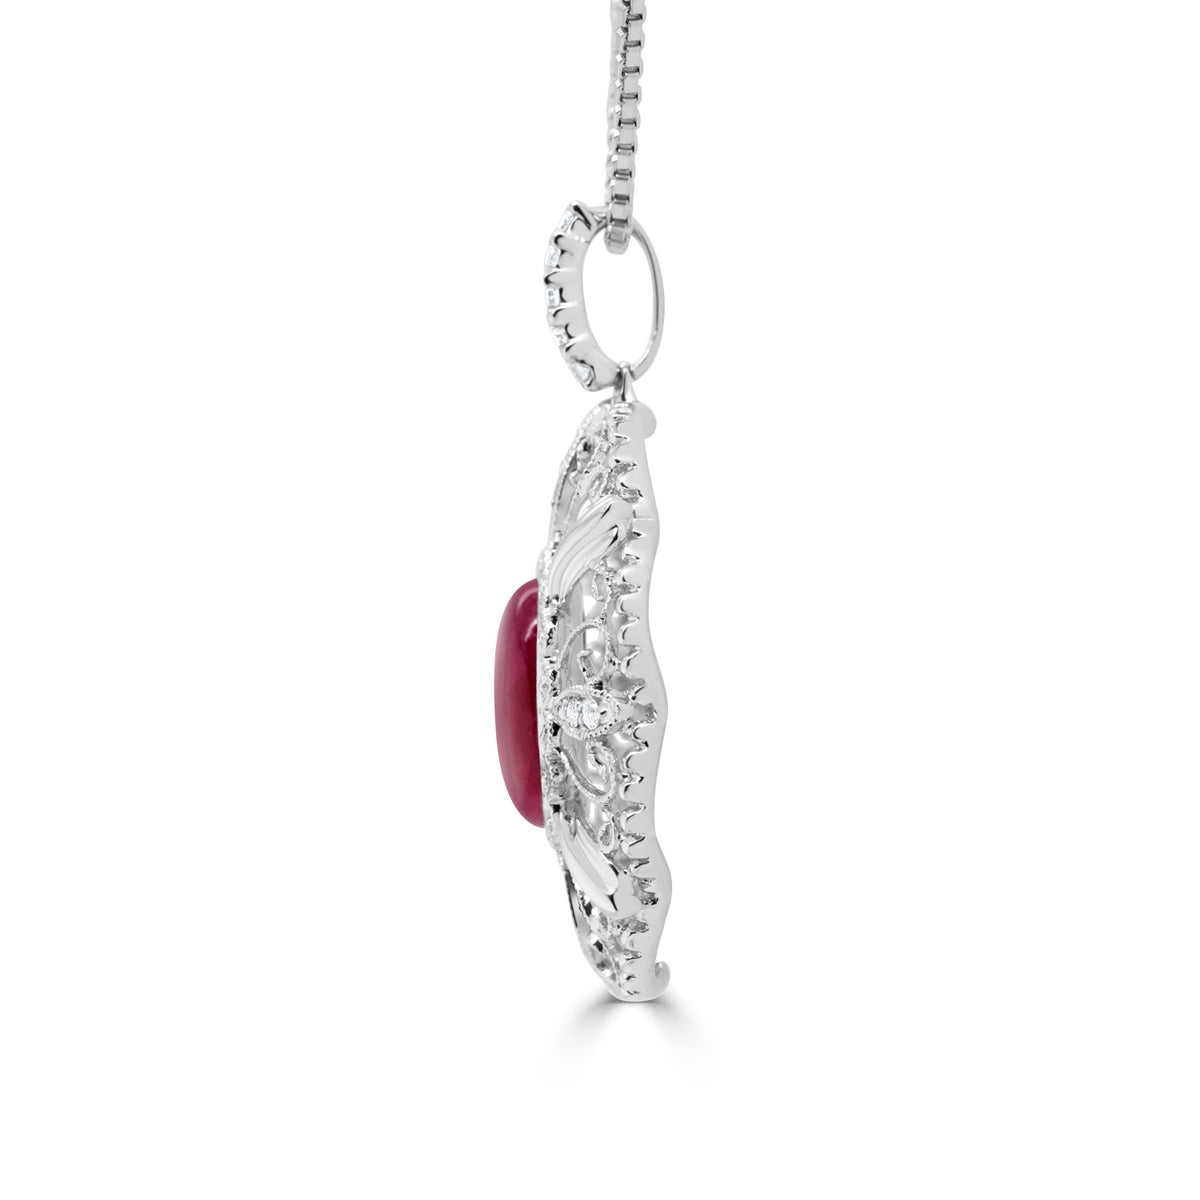 3.21ct Star Ruby Pendant with 0.1tct Diamonds set in 18K White